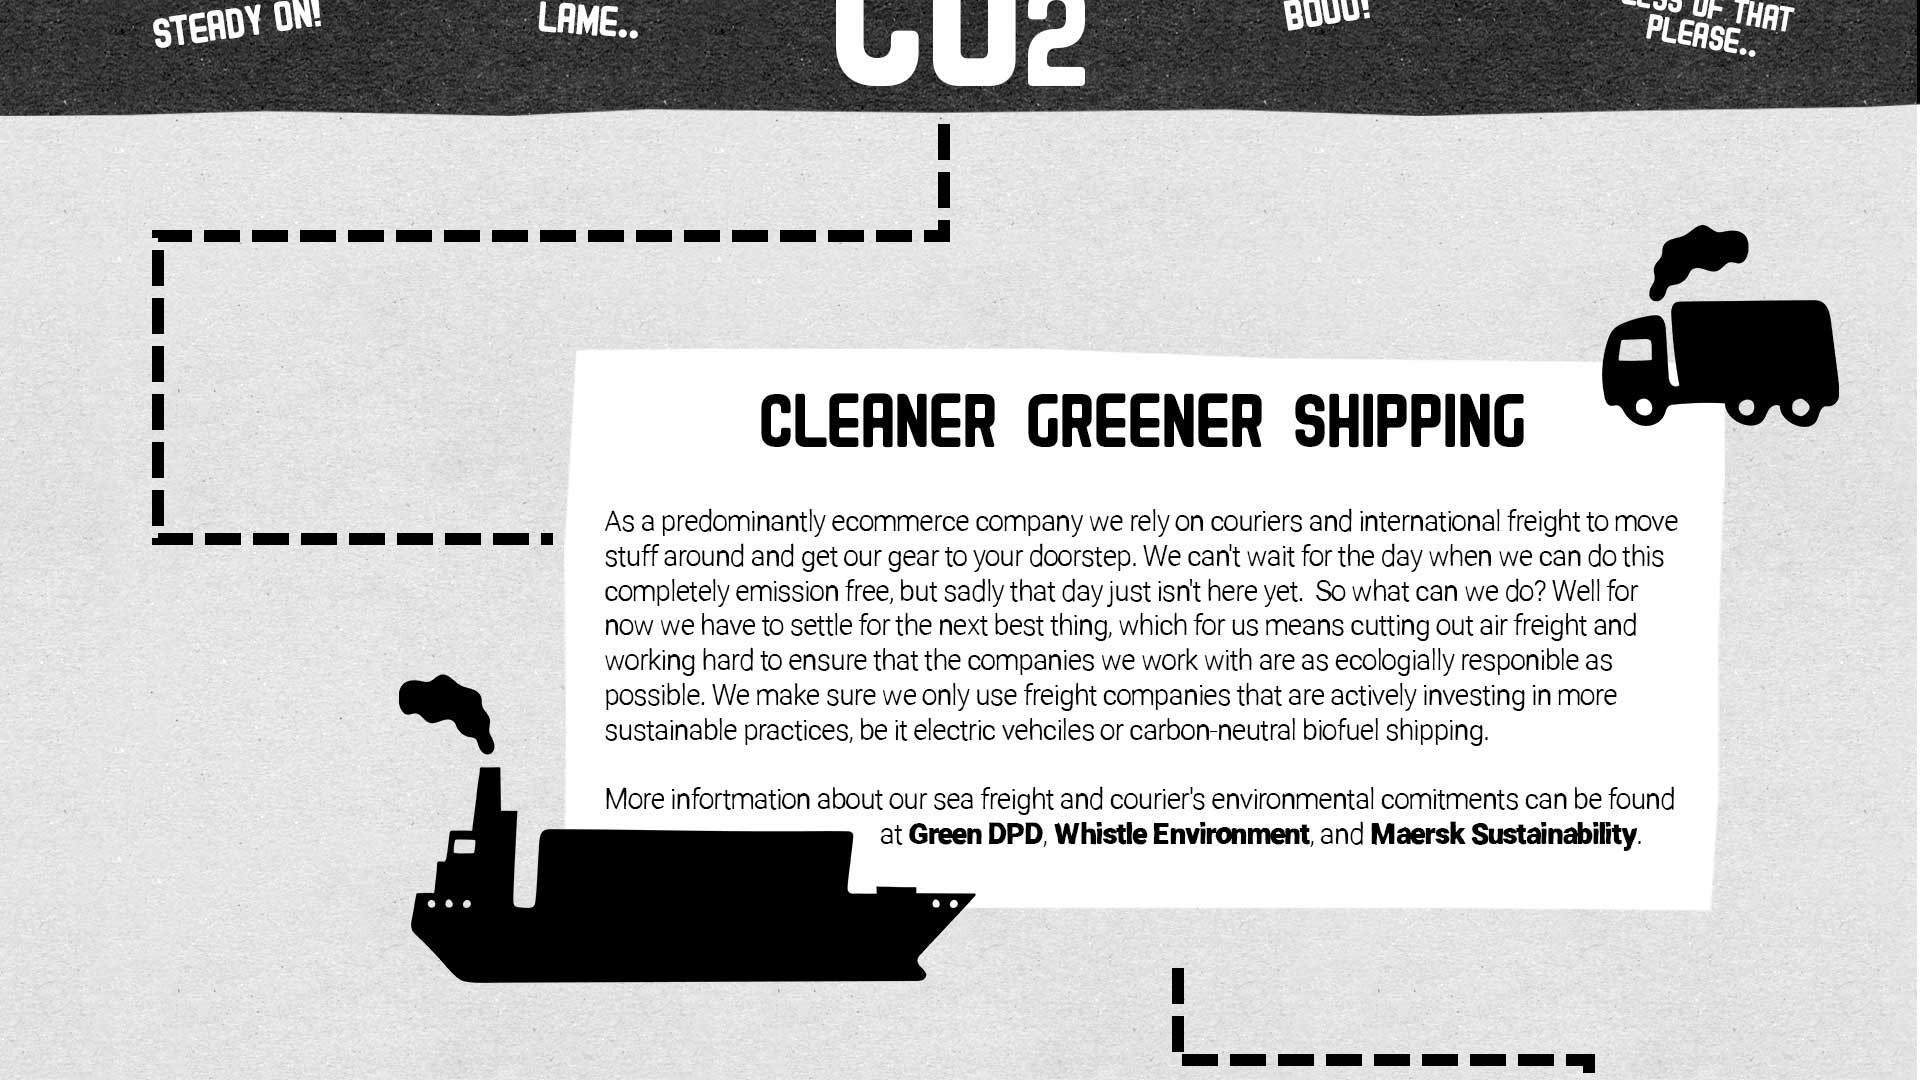 CO2, Lame, Steady On! Boo! Less of that please. CLEANER GREENER SHIPPING   As a predominantly ecommerce company we rely on couriers and international freight to move stuff around and get our gear to your doorstep. We can't wait for the day when we can do this completely emission free, but sadly that day just isn't here yet.  So what can we do? Well for now we have to settle for the next best thing, which for us means cutting out air freight and working hard to ensure that the companies we work with are as ecologially responible as possible. We make sure we only use freight companies that are actively investing in more sustainable practices, be it electric vehciles or carbon-neutral biofuel shipping.   More infortmation about our sea freight and courier's environmental comitments can be found at Green DPD, Whistle Environment, and Maersk Sustainability.